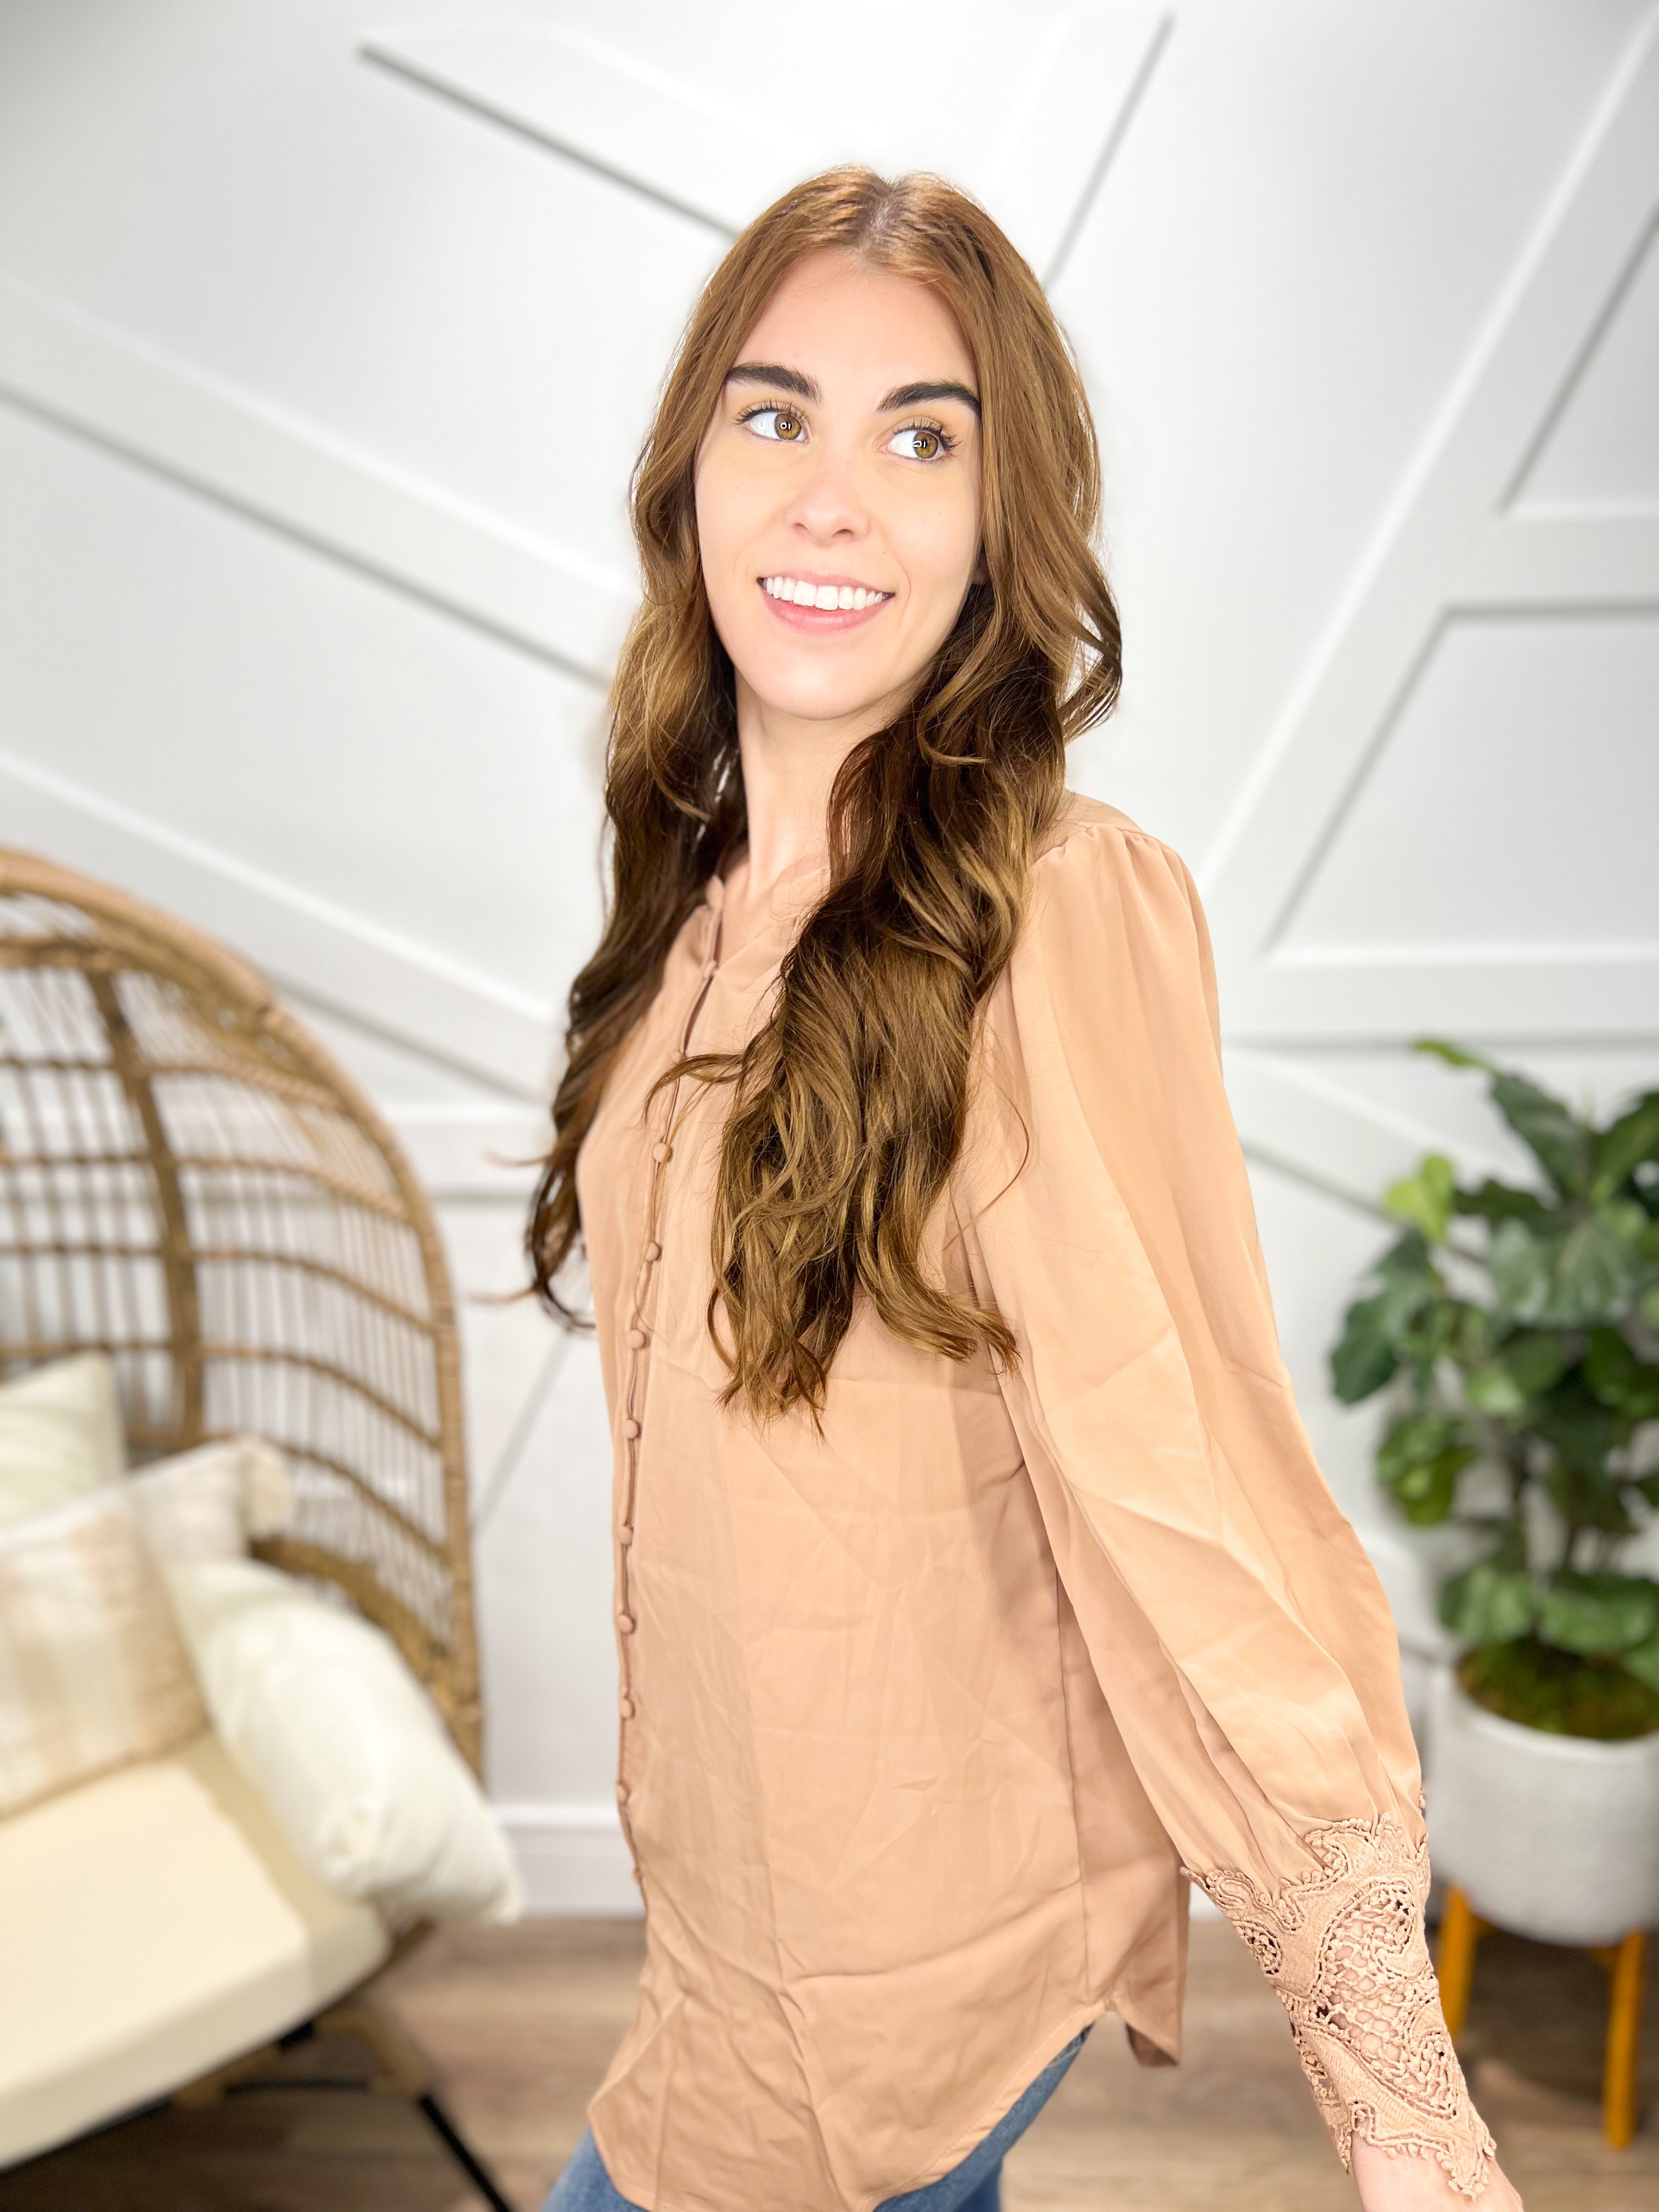 Sass and Class Blouse Top-120 Long Sleeve Tops-First Love-Heathered Boho Boutique, Women's Fashion and Accessories in Palmetto, FL